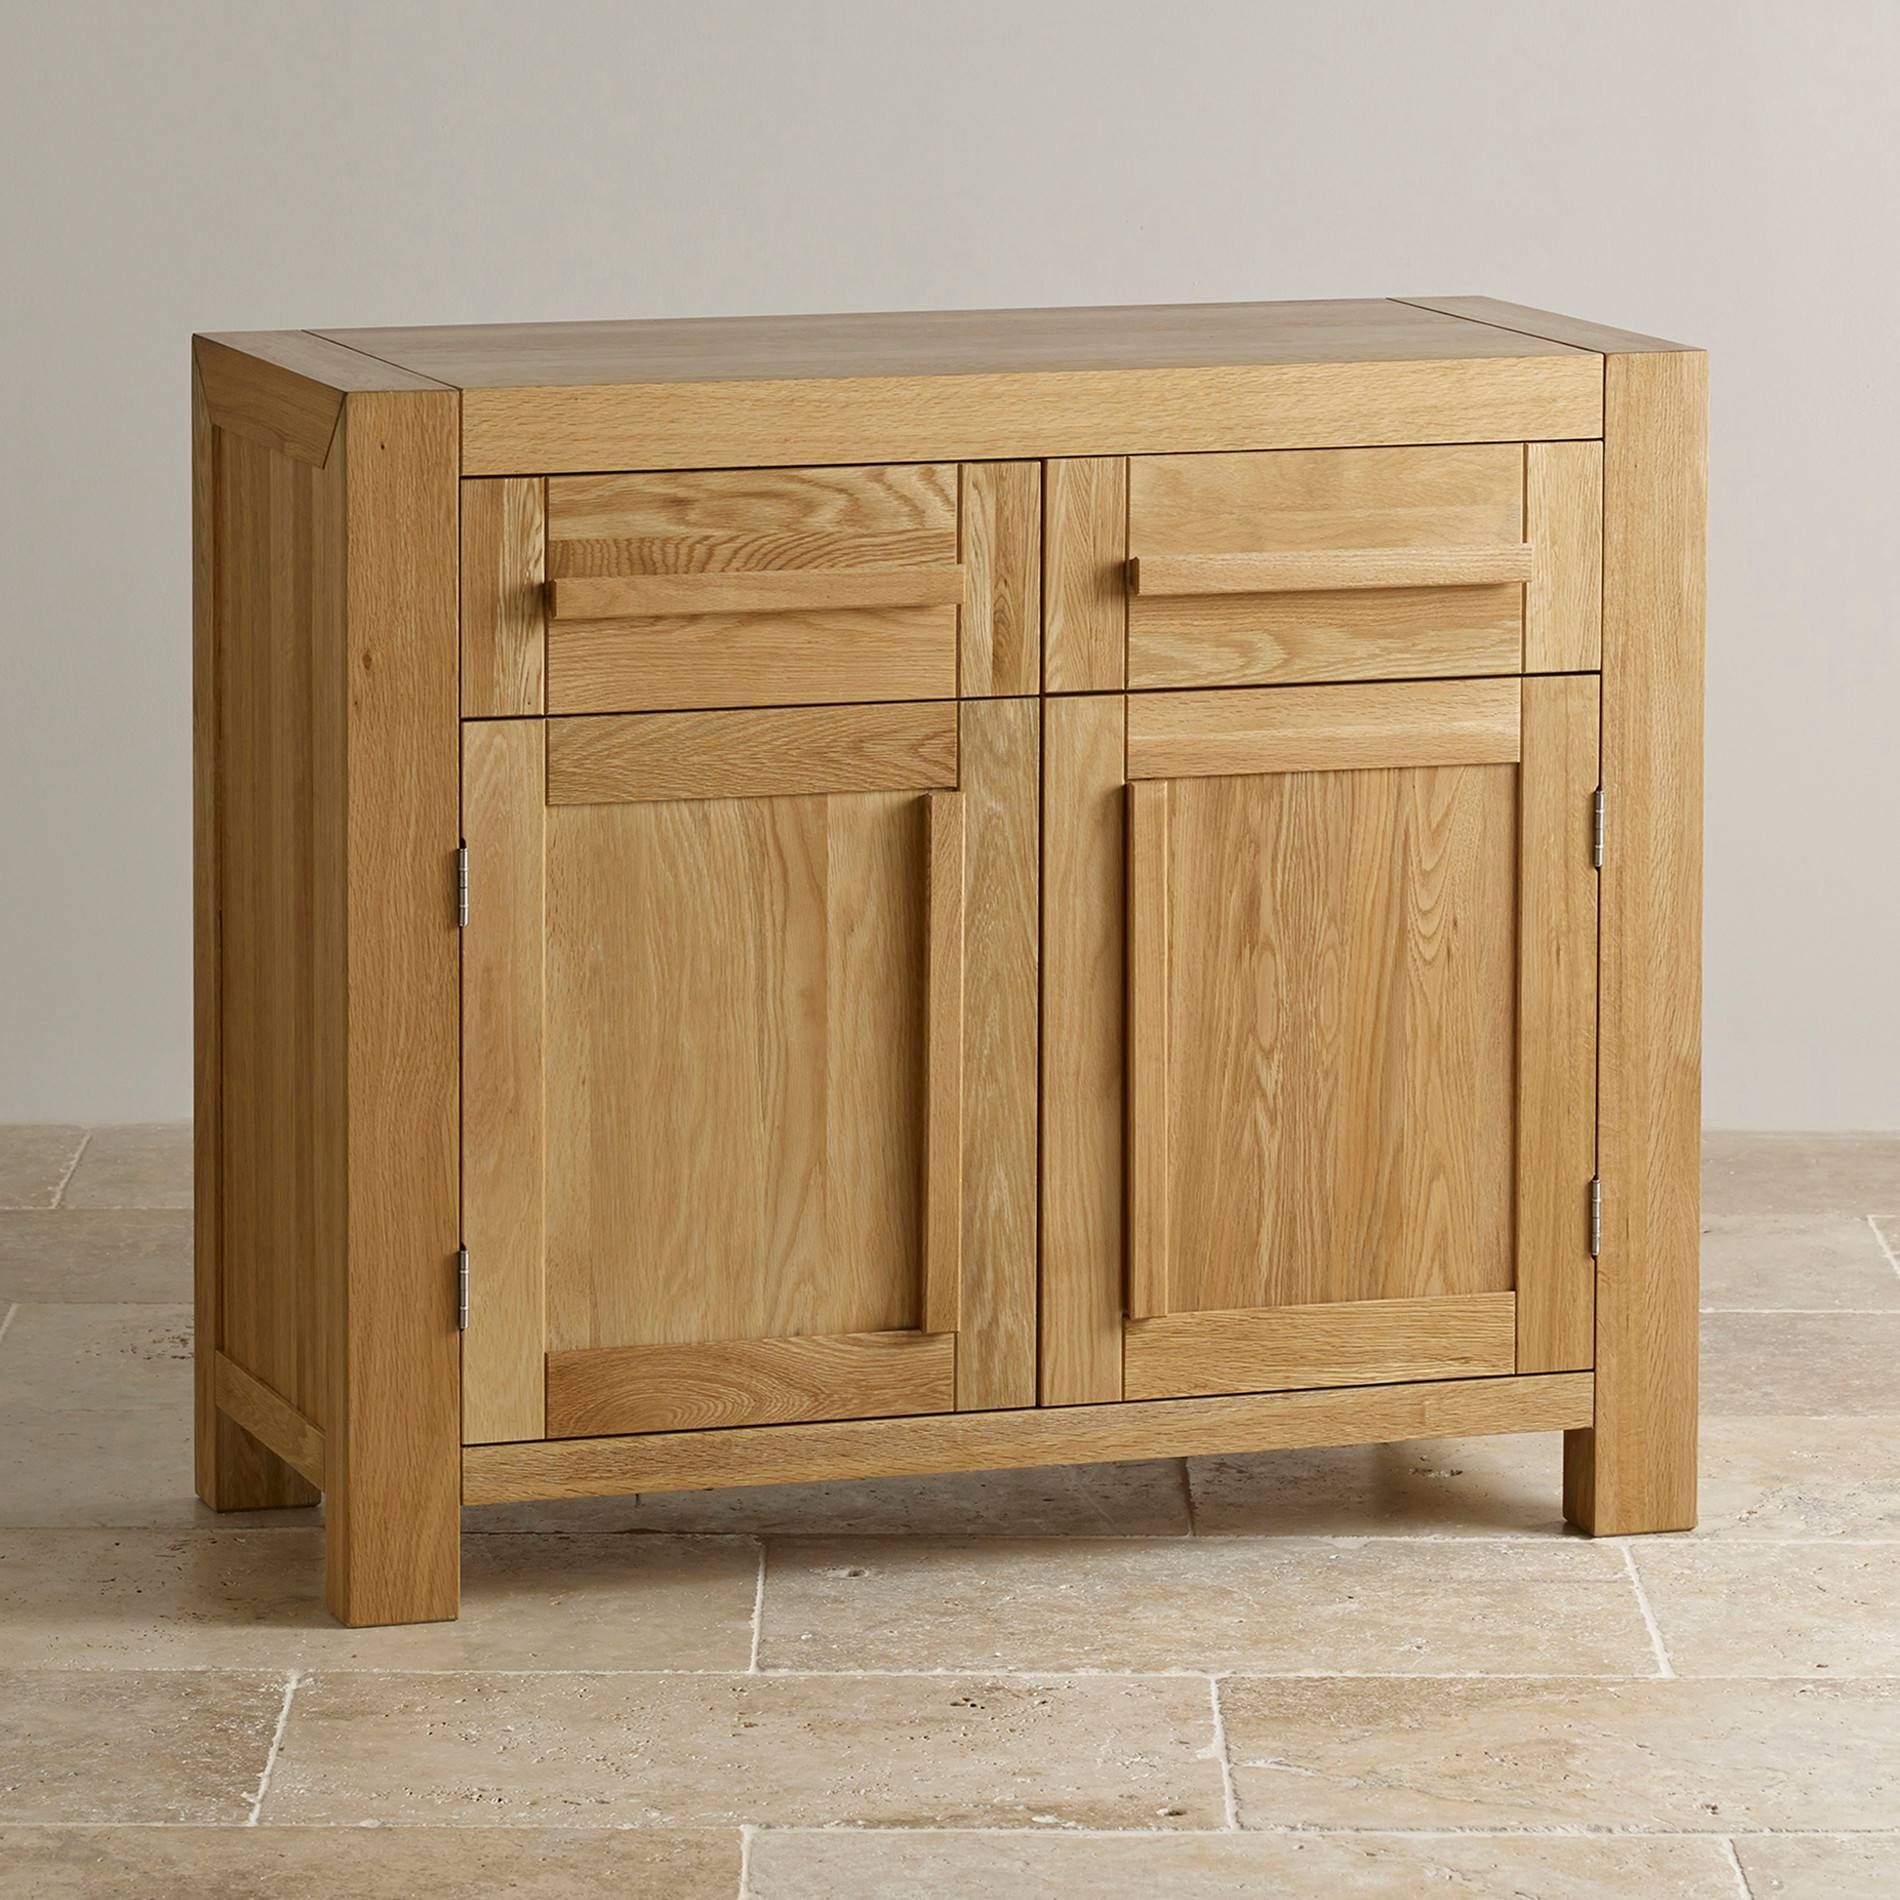 Fresco Natural Solid Oak Small Sideboard | Oak Furniture Land With Regard To Oak Sideboards (View 7 of 20)